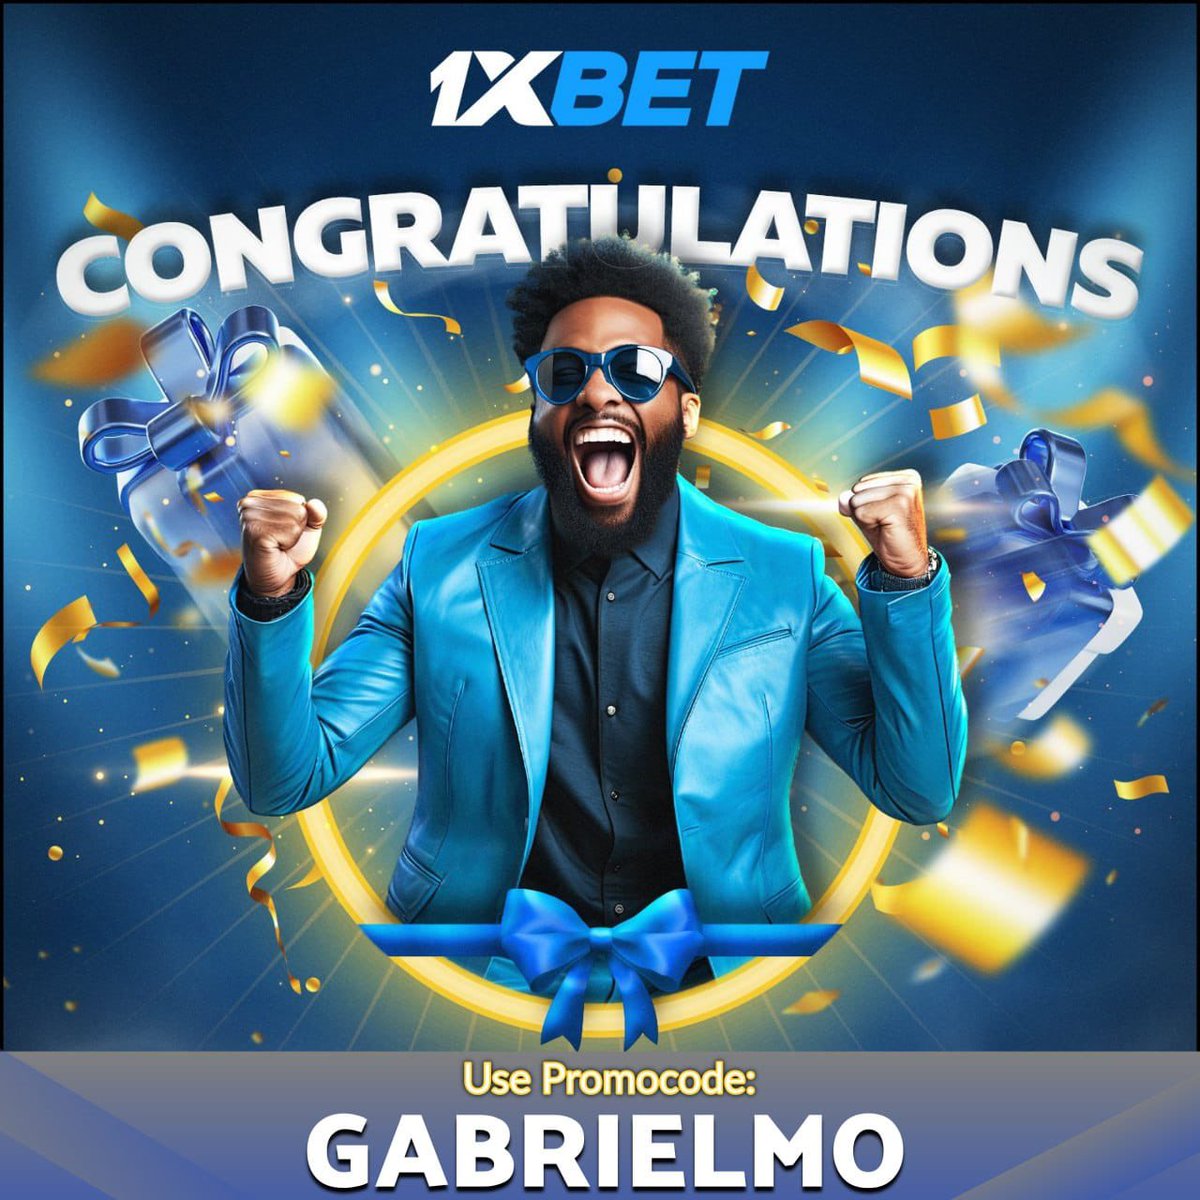 Check my pinned post for a chance to win 2 brand new Samsung smartphones this coming weekend. Giveaway courtesy of #1xbet